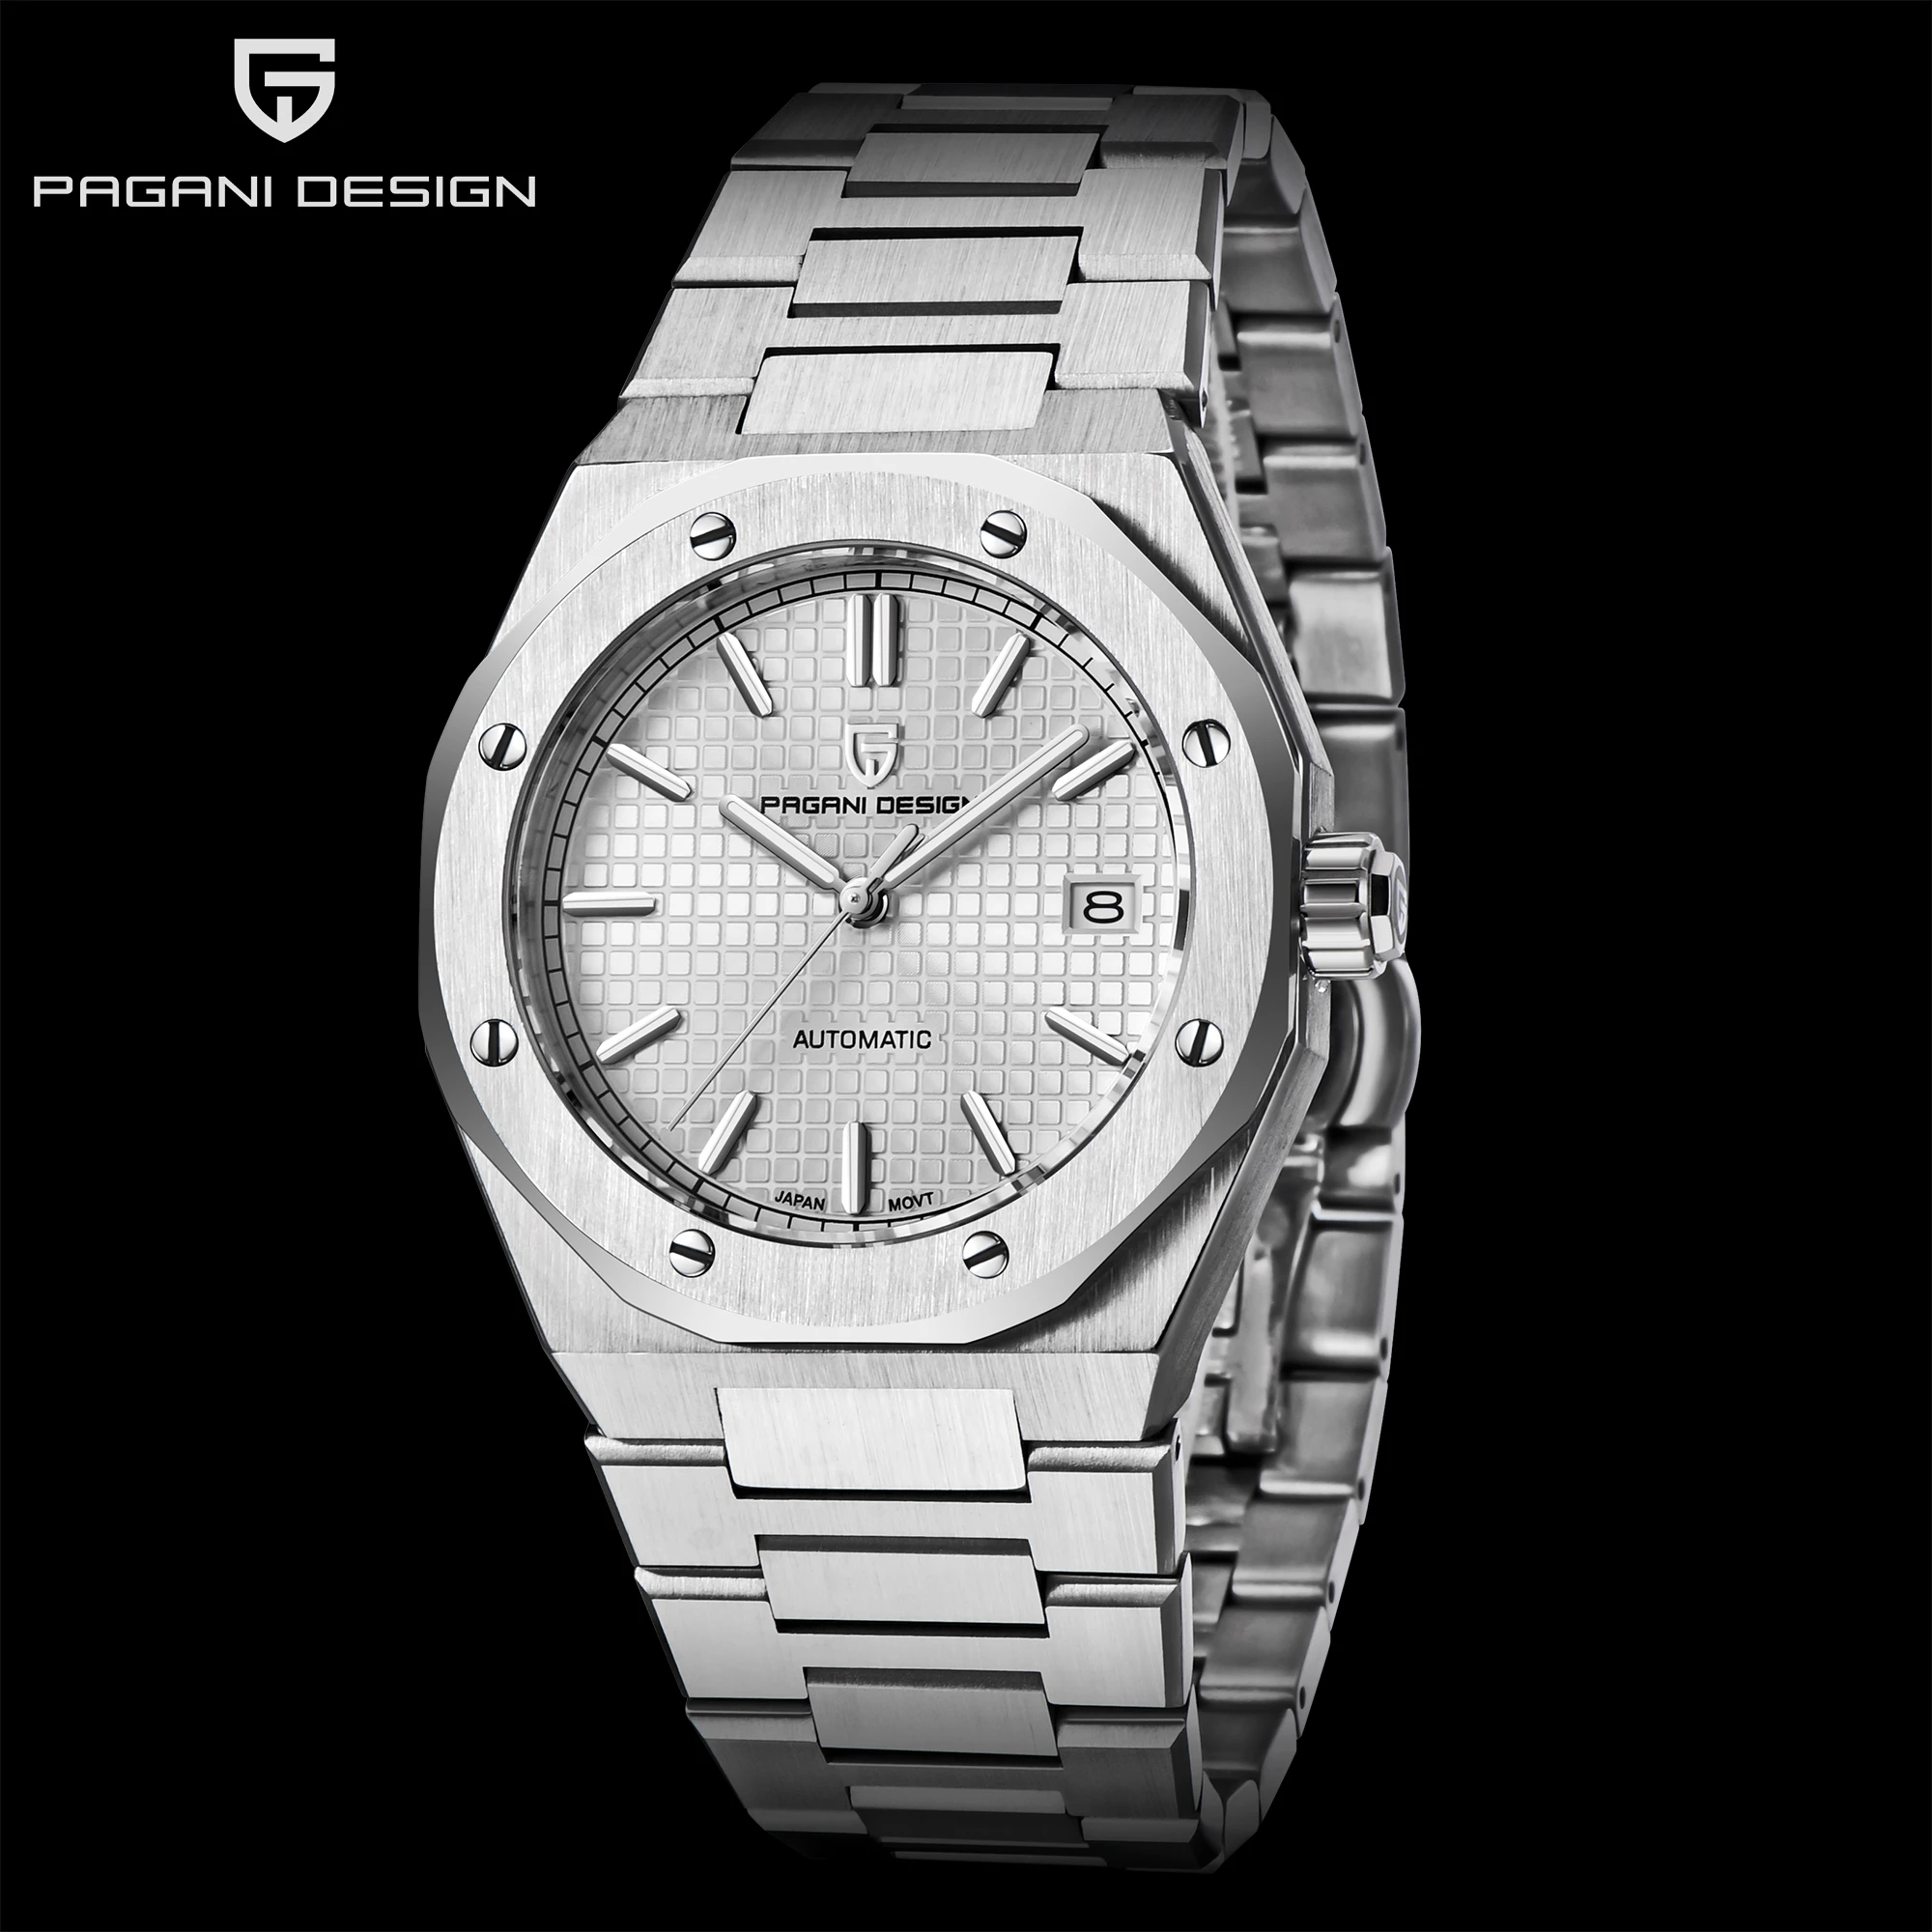 2021 PAGANI DESIGN Top Brand New 40mm Men's Automatic Mechanical Watches luxury Sapphire Stainless Steel Men watch reloj hombre